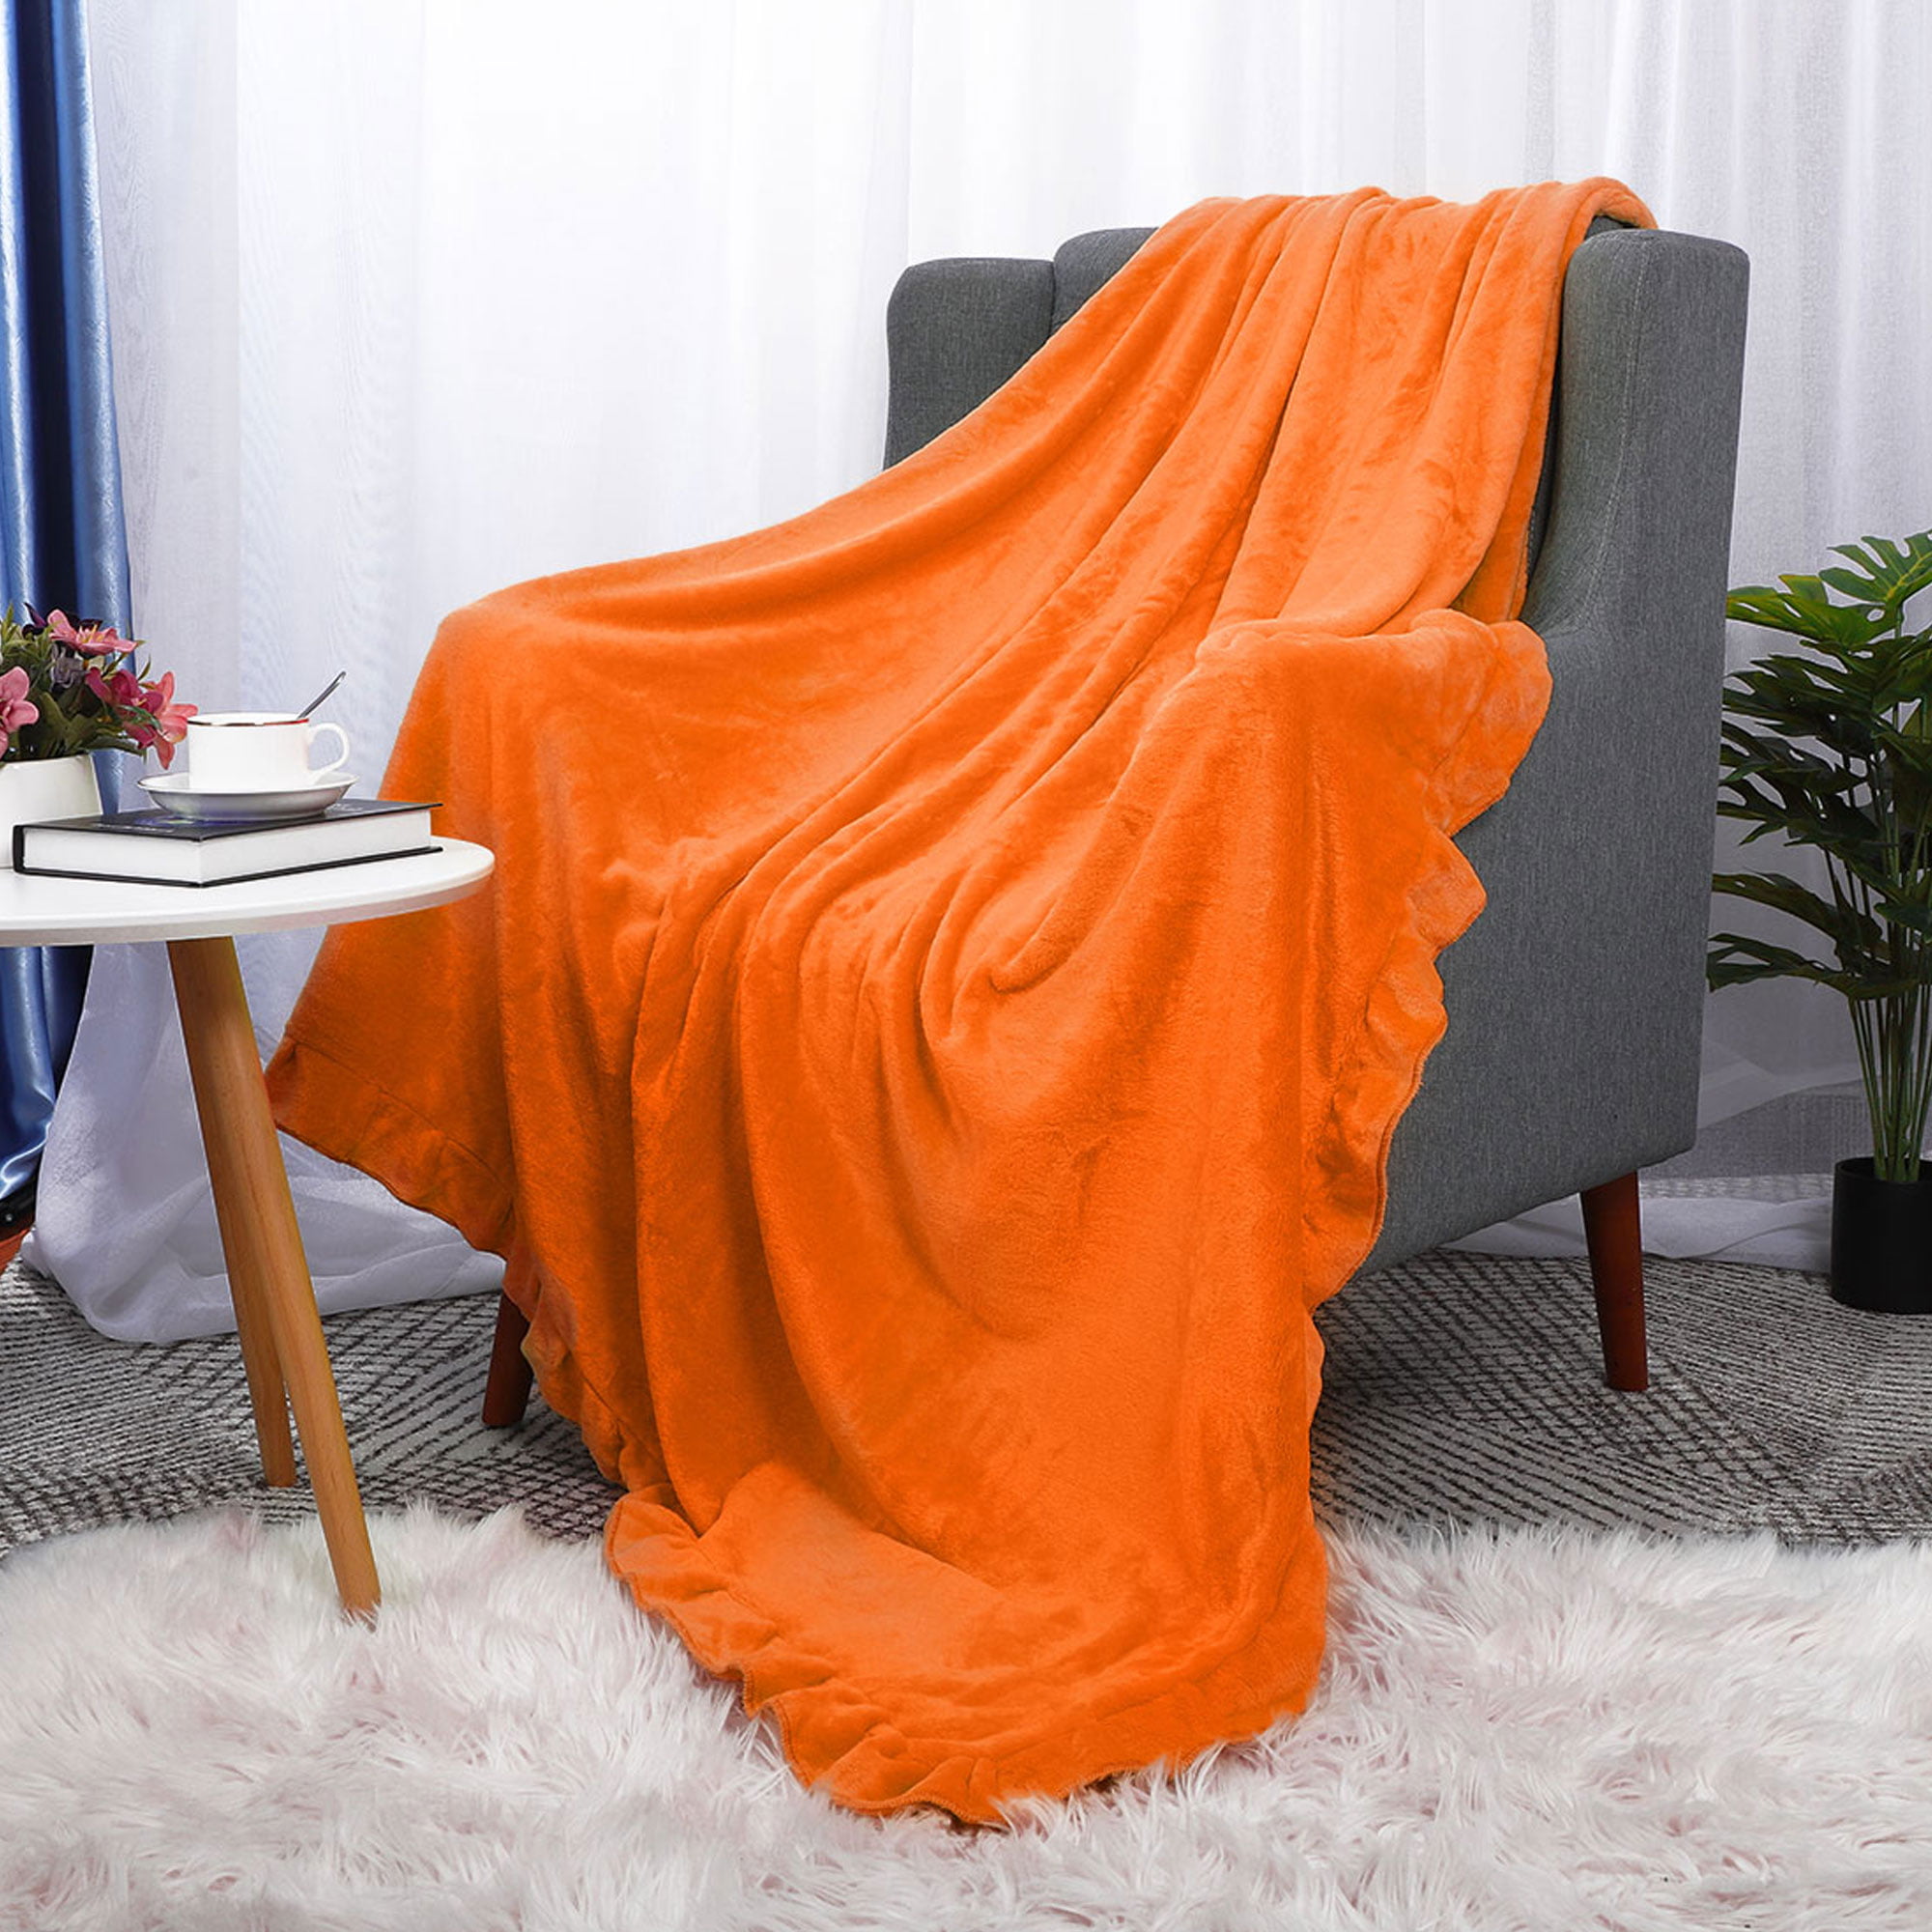 Home/Travel/Camping Applicable Moslion Soft Cozy Throw Blanket Stars Flowers Heart Emotions Colorful Fuzzy Couch/Bed Blanket for Adult/Youth Polyester 50 X 60 Inches 